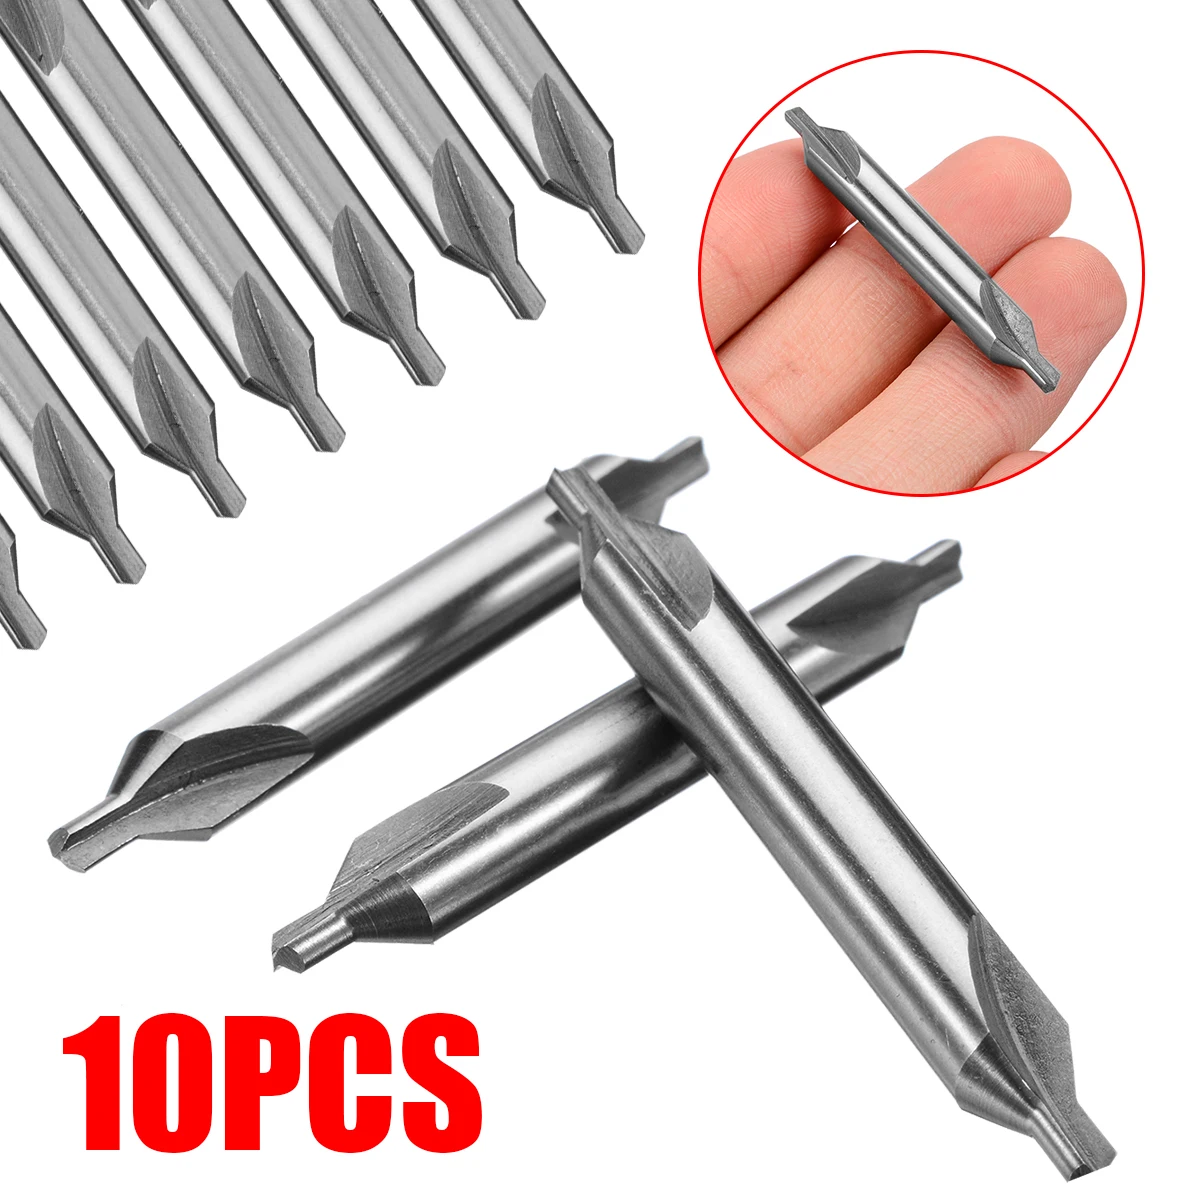 

10Pcs/Set 60 Degree Combined Countersink Center Drills Bits 2.5mm High Speed Steel Drill Bit For Hole Machining Reduces Error